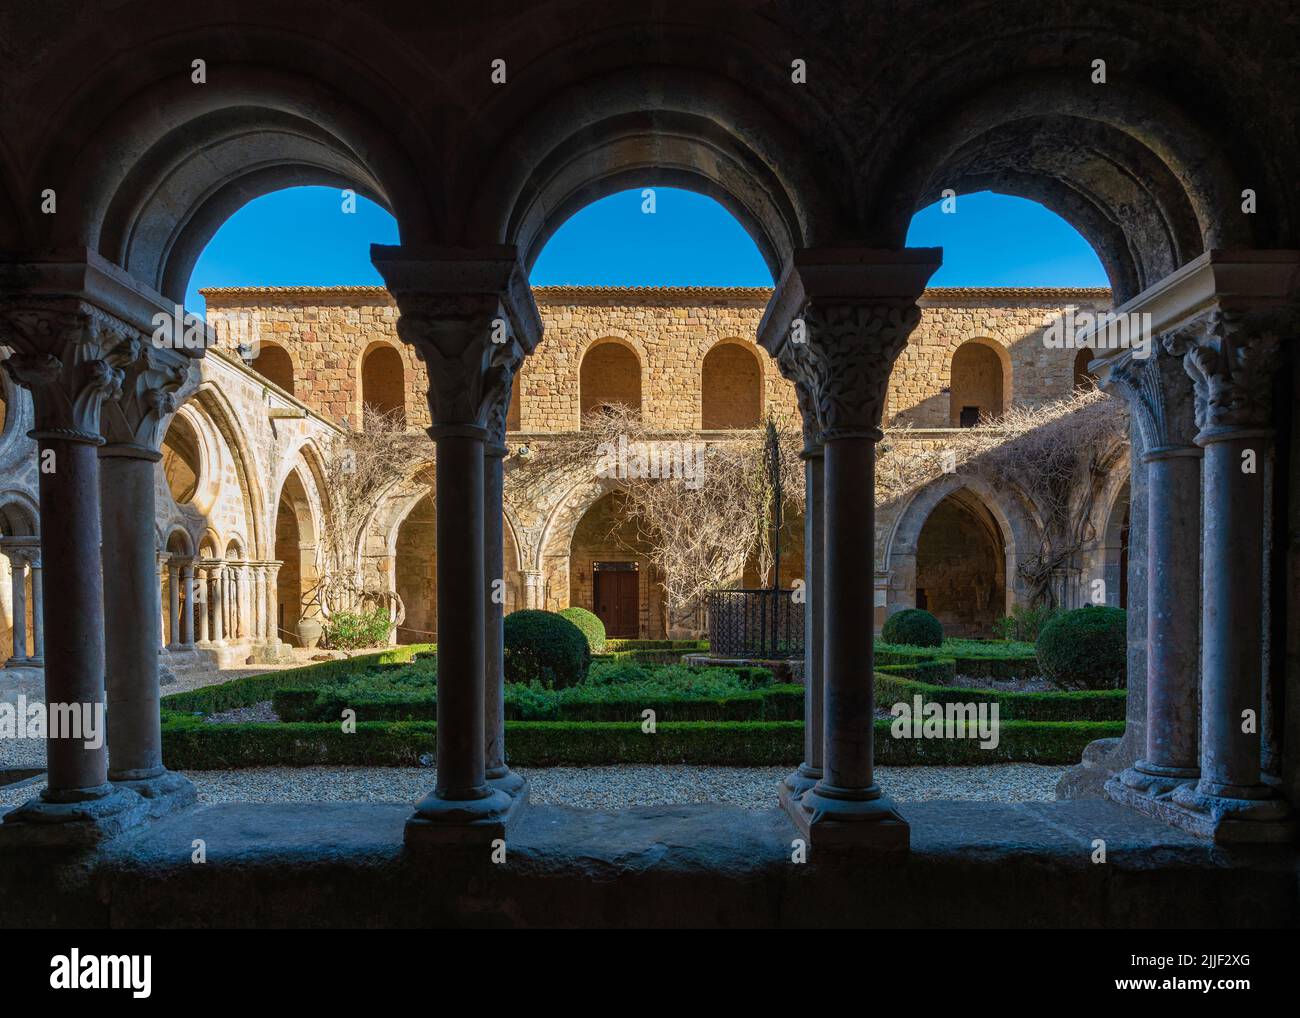 Columns of the cloister of the Frontfroide Abbey, France, taken on a sunny winter afternoon with no people Stock Photo